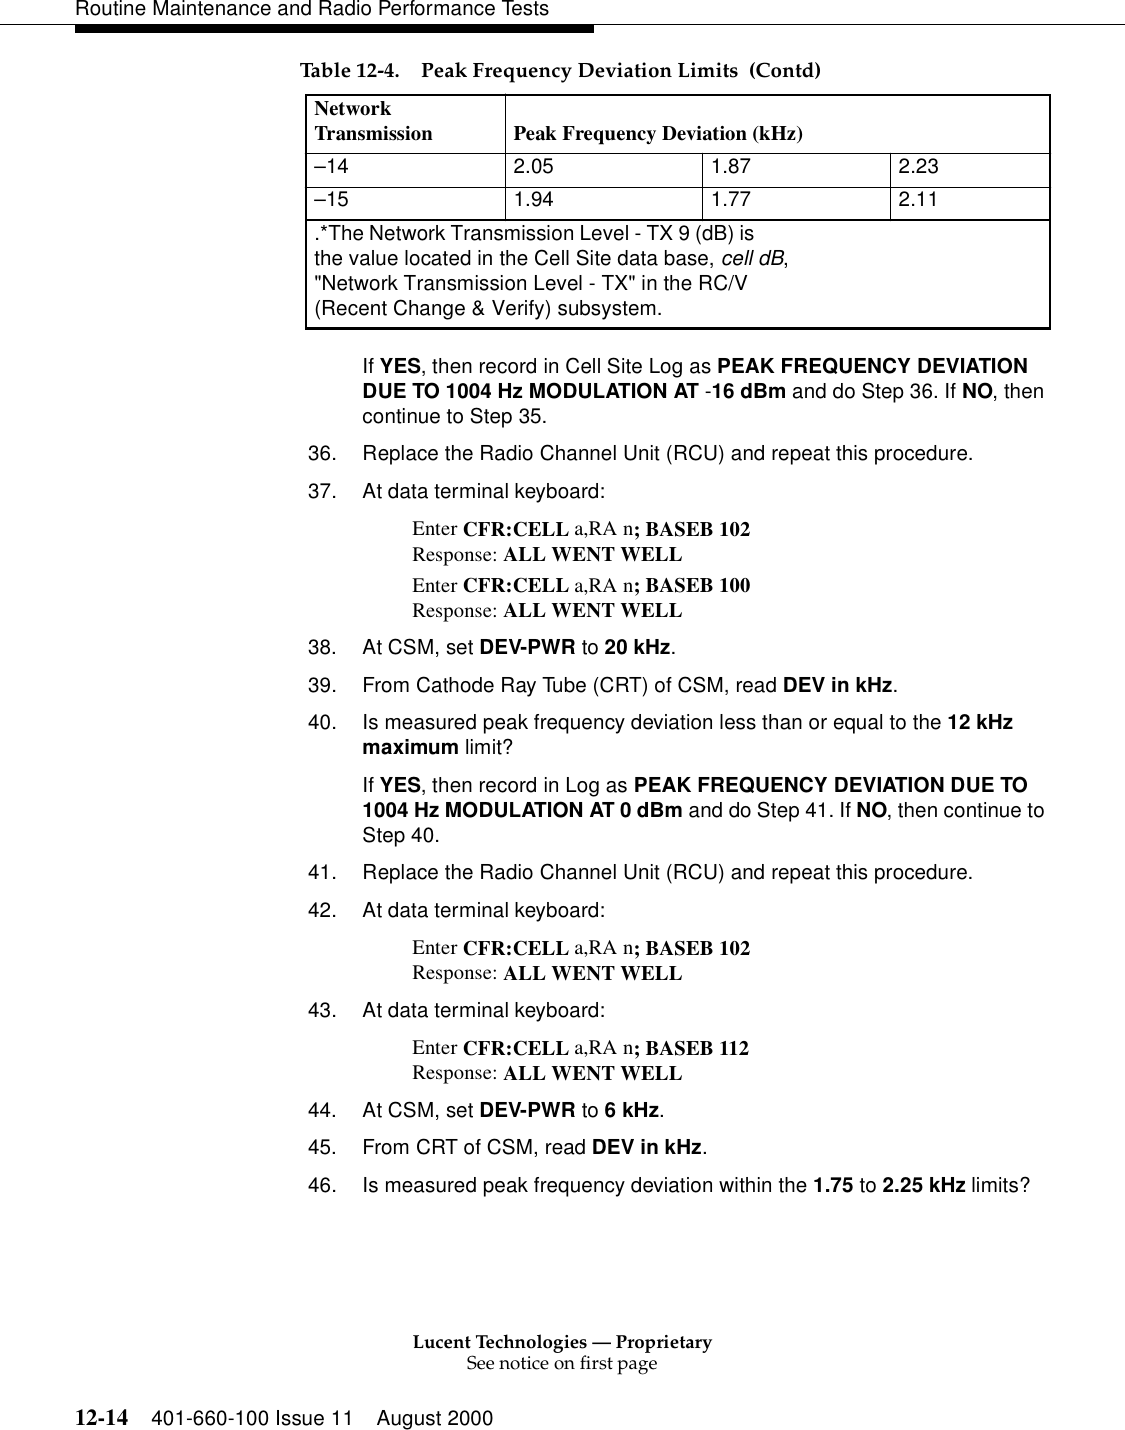 Lucent Technologies — ProprietarySee notice on first page12-14 401-660-100 Issue 11 August 2000Routine Maintenance and Radio Performance TestsIf YES, then record in Cell Site Log as PEAK FREQUENCY DEVIATION DUE TO 1004 Hz MODULATION AT -16 dBm and do Step 36. If NO, then continue to Step 35. 36. Replace the Radio Channel Unit (RCU) and repeat this procedure. 37. At data terminal keyboard: Enter CFR:CELL a,RA n; BASEB 102 Response: ALL WENT WELL Enter CFR:CELL a,RA n; BASEB 100 Response: ALL WENT WELL 38. At CSM, set DEV-PWR to 20 kHz. 39. From Cathode Ray Tube (CRT) of CSM, read DEV in kHz. 40. Is measured peak frequency deviation less than or equal to the 12 kHz maximum limit? If YES, then record in Log as PEAK FREQUENCY DEVIATION DUE TO 1004 Hz MODULATION AT 0 dBm and do Step 41. If NO, then continue to Step 40. 41. Replace the Radio Channel Unit (RCU) and repeat this procedure. 42. At data terminal keyboard: Enter CFR:CELL a,RA n; BASEB 102 Response: ALL WENT WELL 43. At data terminal keyboard: Enter CFR:CELL a,RA n; BASEB 112 Response: ALL WENT WELL 44. At CSM, set DEV-PWR to 6 kHz. 45. From CRT of CSM, read DEV in kHz. 46. Is measured peak frequency deviation within the 1.75 to 2.25 kHz limits? –14 2.05 1.87 2.23 –15 1.94 1.77 2.11 .*The Network Transmission Level - TX 9 (dB) is the value located in the Cell Site data base, cell dB, &quot;Network Transmission Level - TX&quot; in the RC/V (Recent Change &amp; Verify) subsystem. Table 12-4. Peak Frequency Deviation Limits  (Contd)Network Transmission  Peak Frequency Deviation (kHz) 